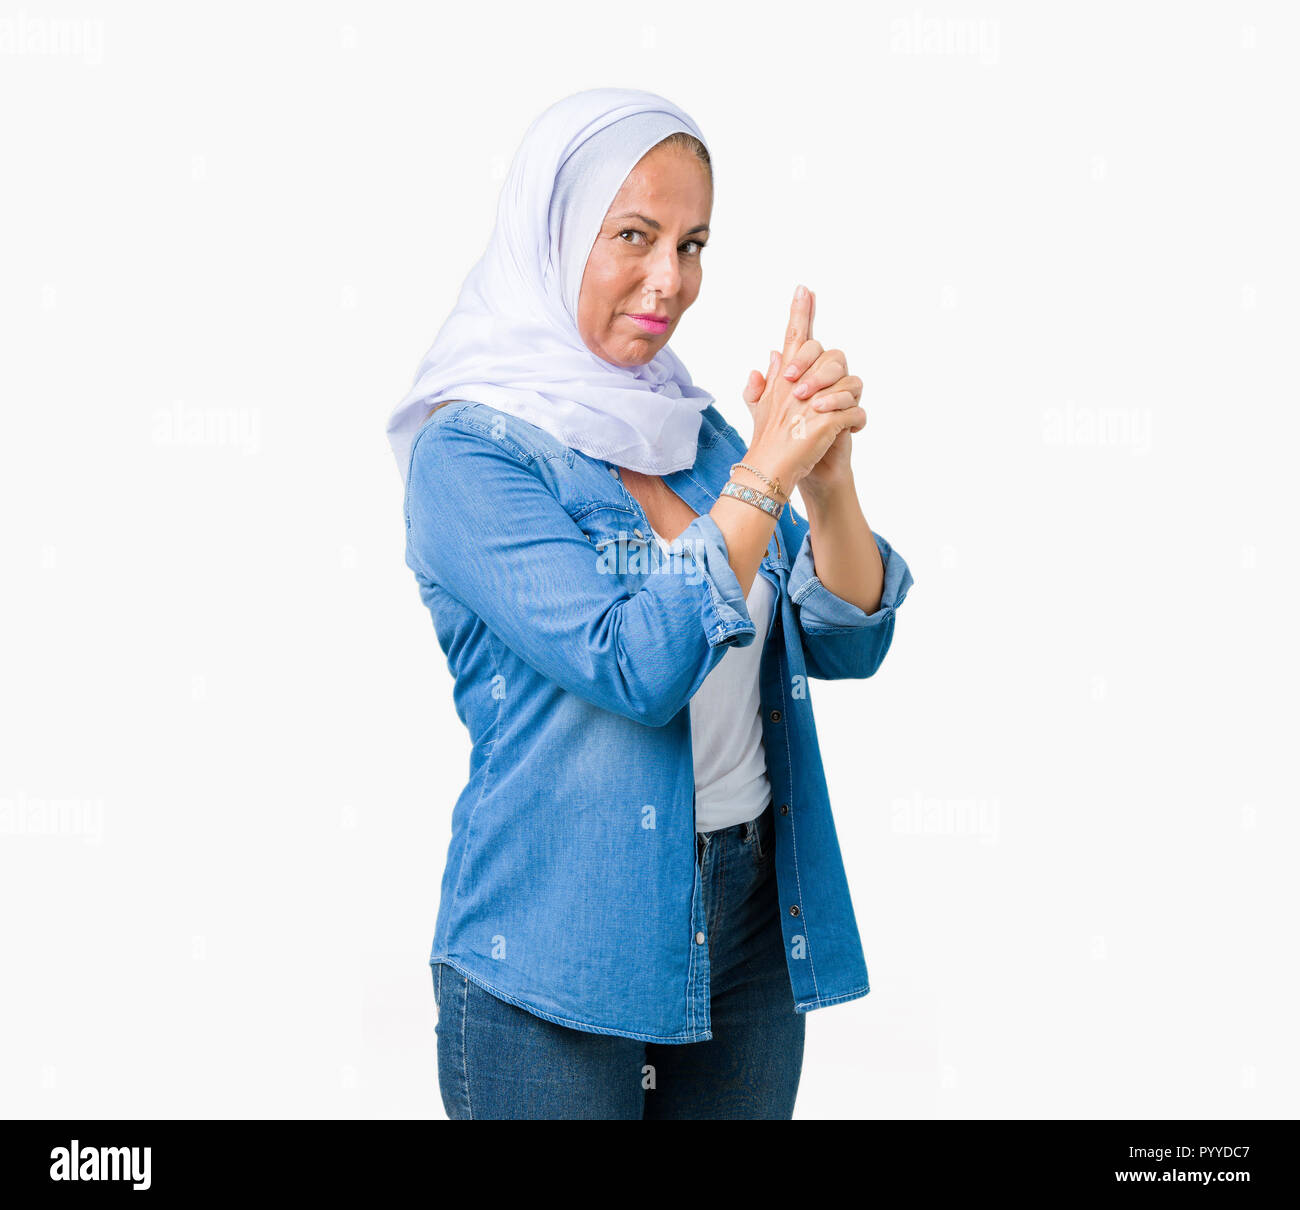 Middle age eastern arab woman wearing arabian hijab over isolated background Holding symbolic gun with hand gesture, playing killing shooting weapons, Stock Photo